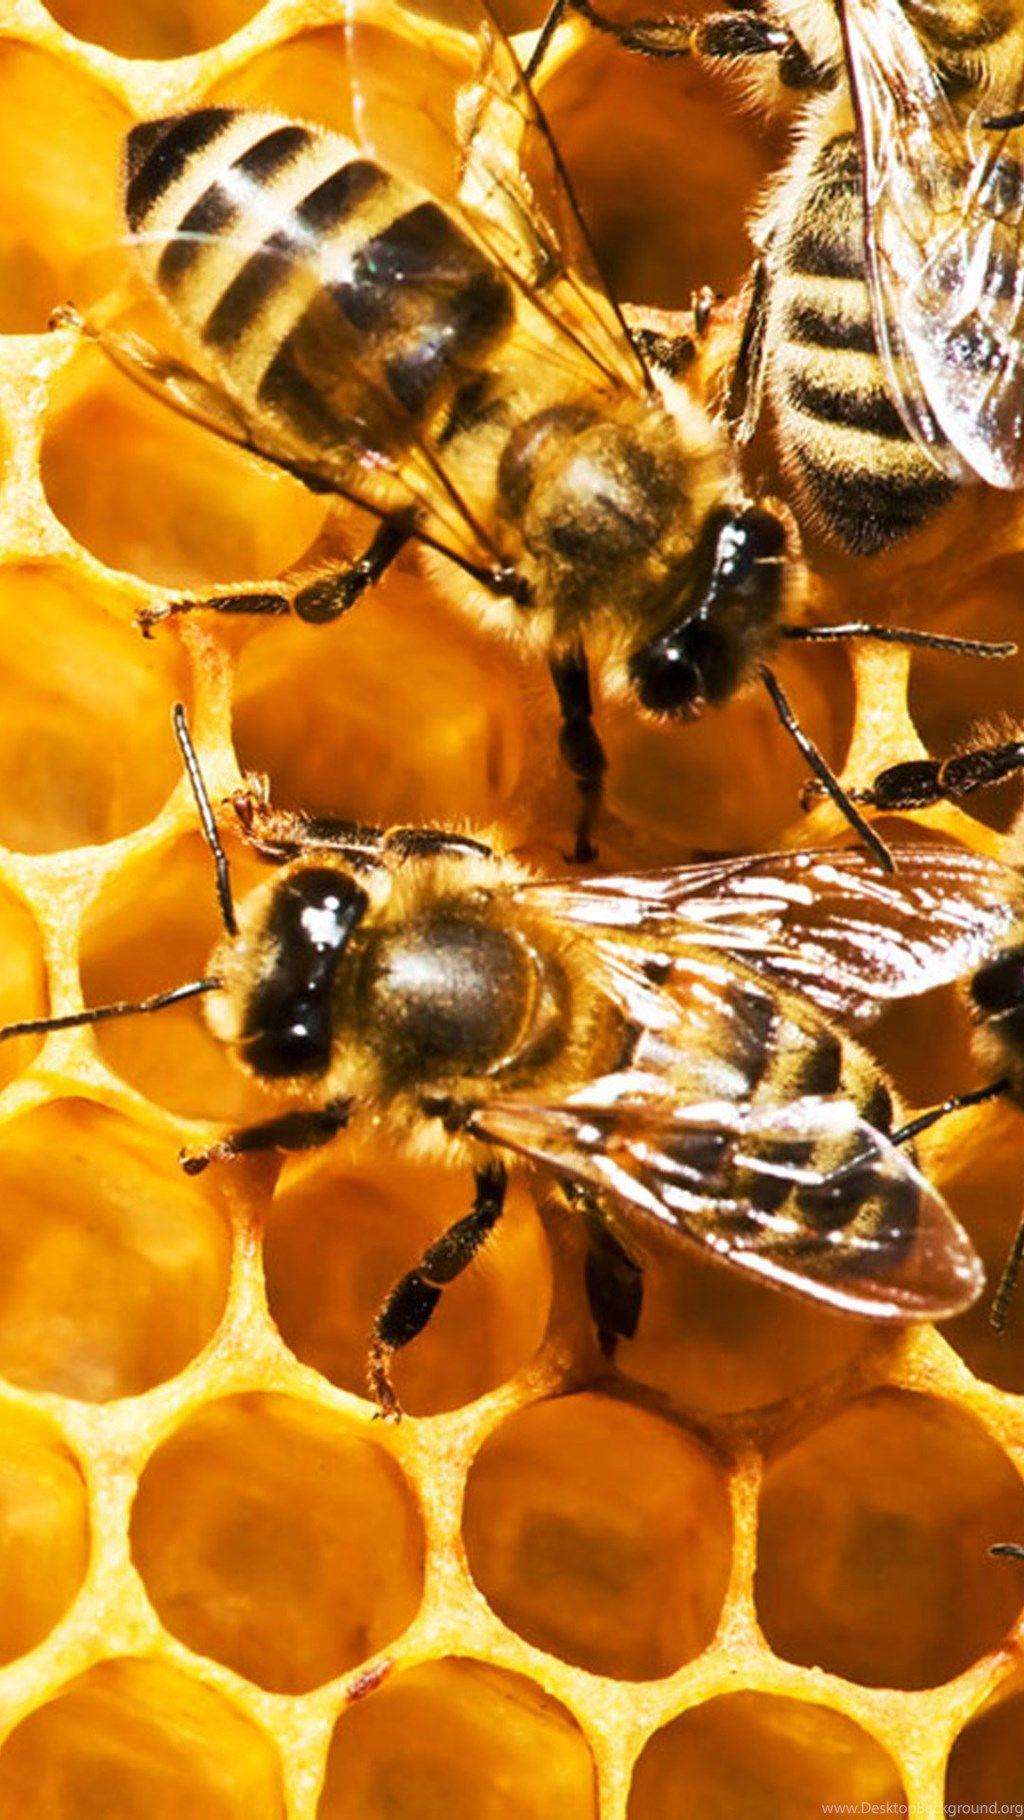 Bees And Honeycomb Galaxy S4 Wallpaper Desktop Background